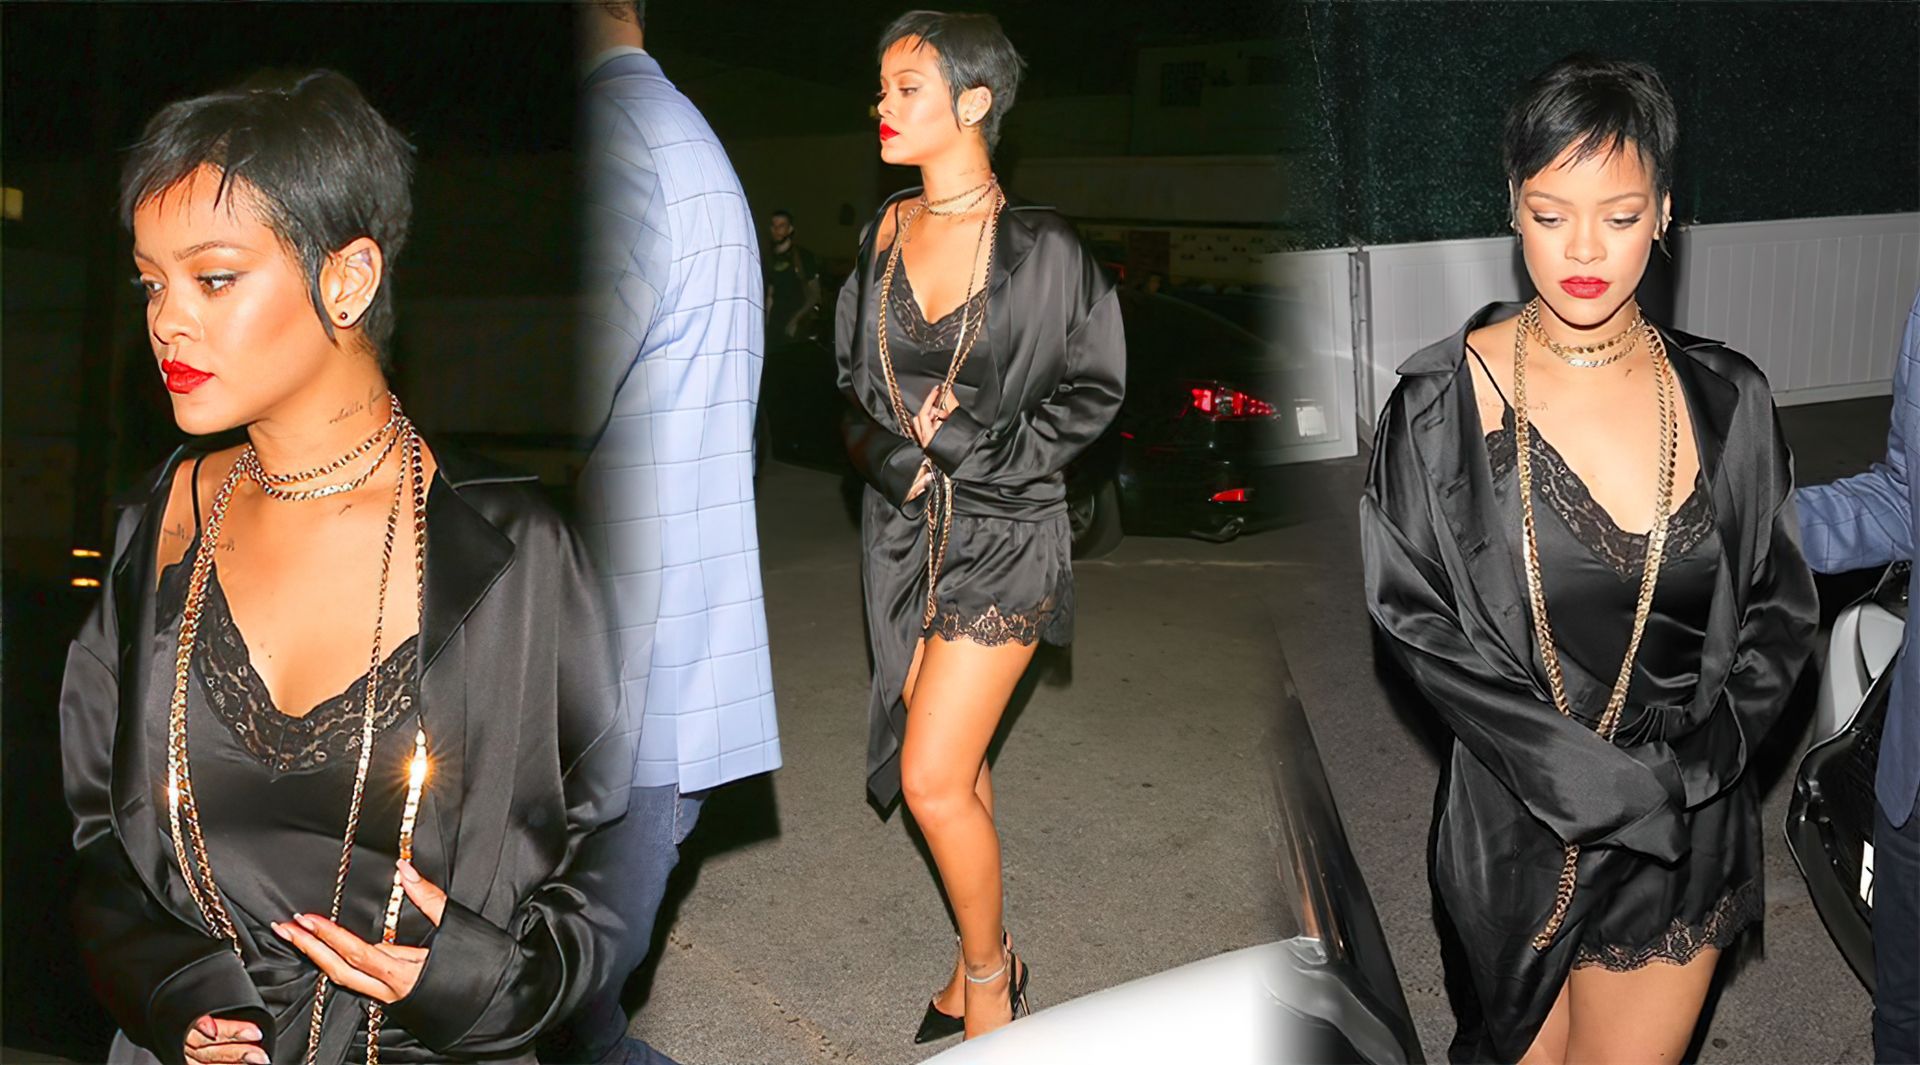 Rihanna Puts on a Sultry Display in Black Silk While Leaving Delilah Nightclub with Friends (22 Photos)